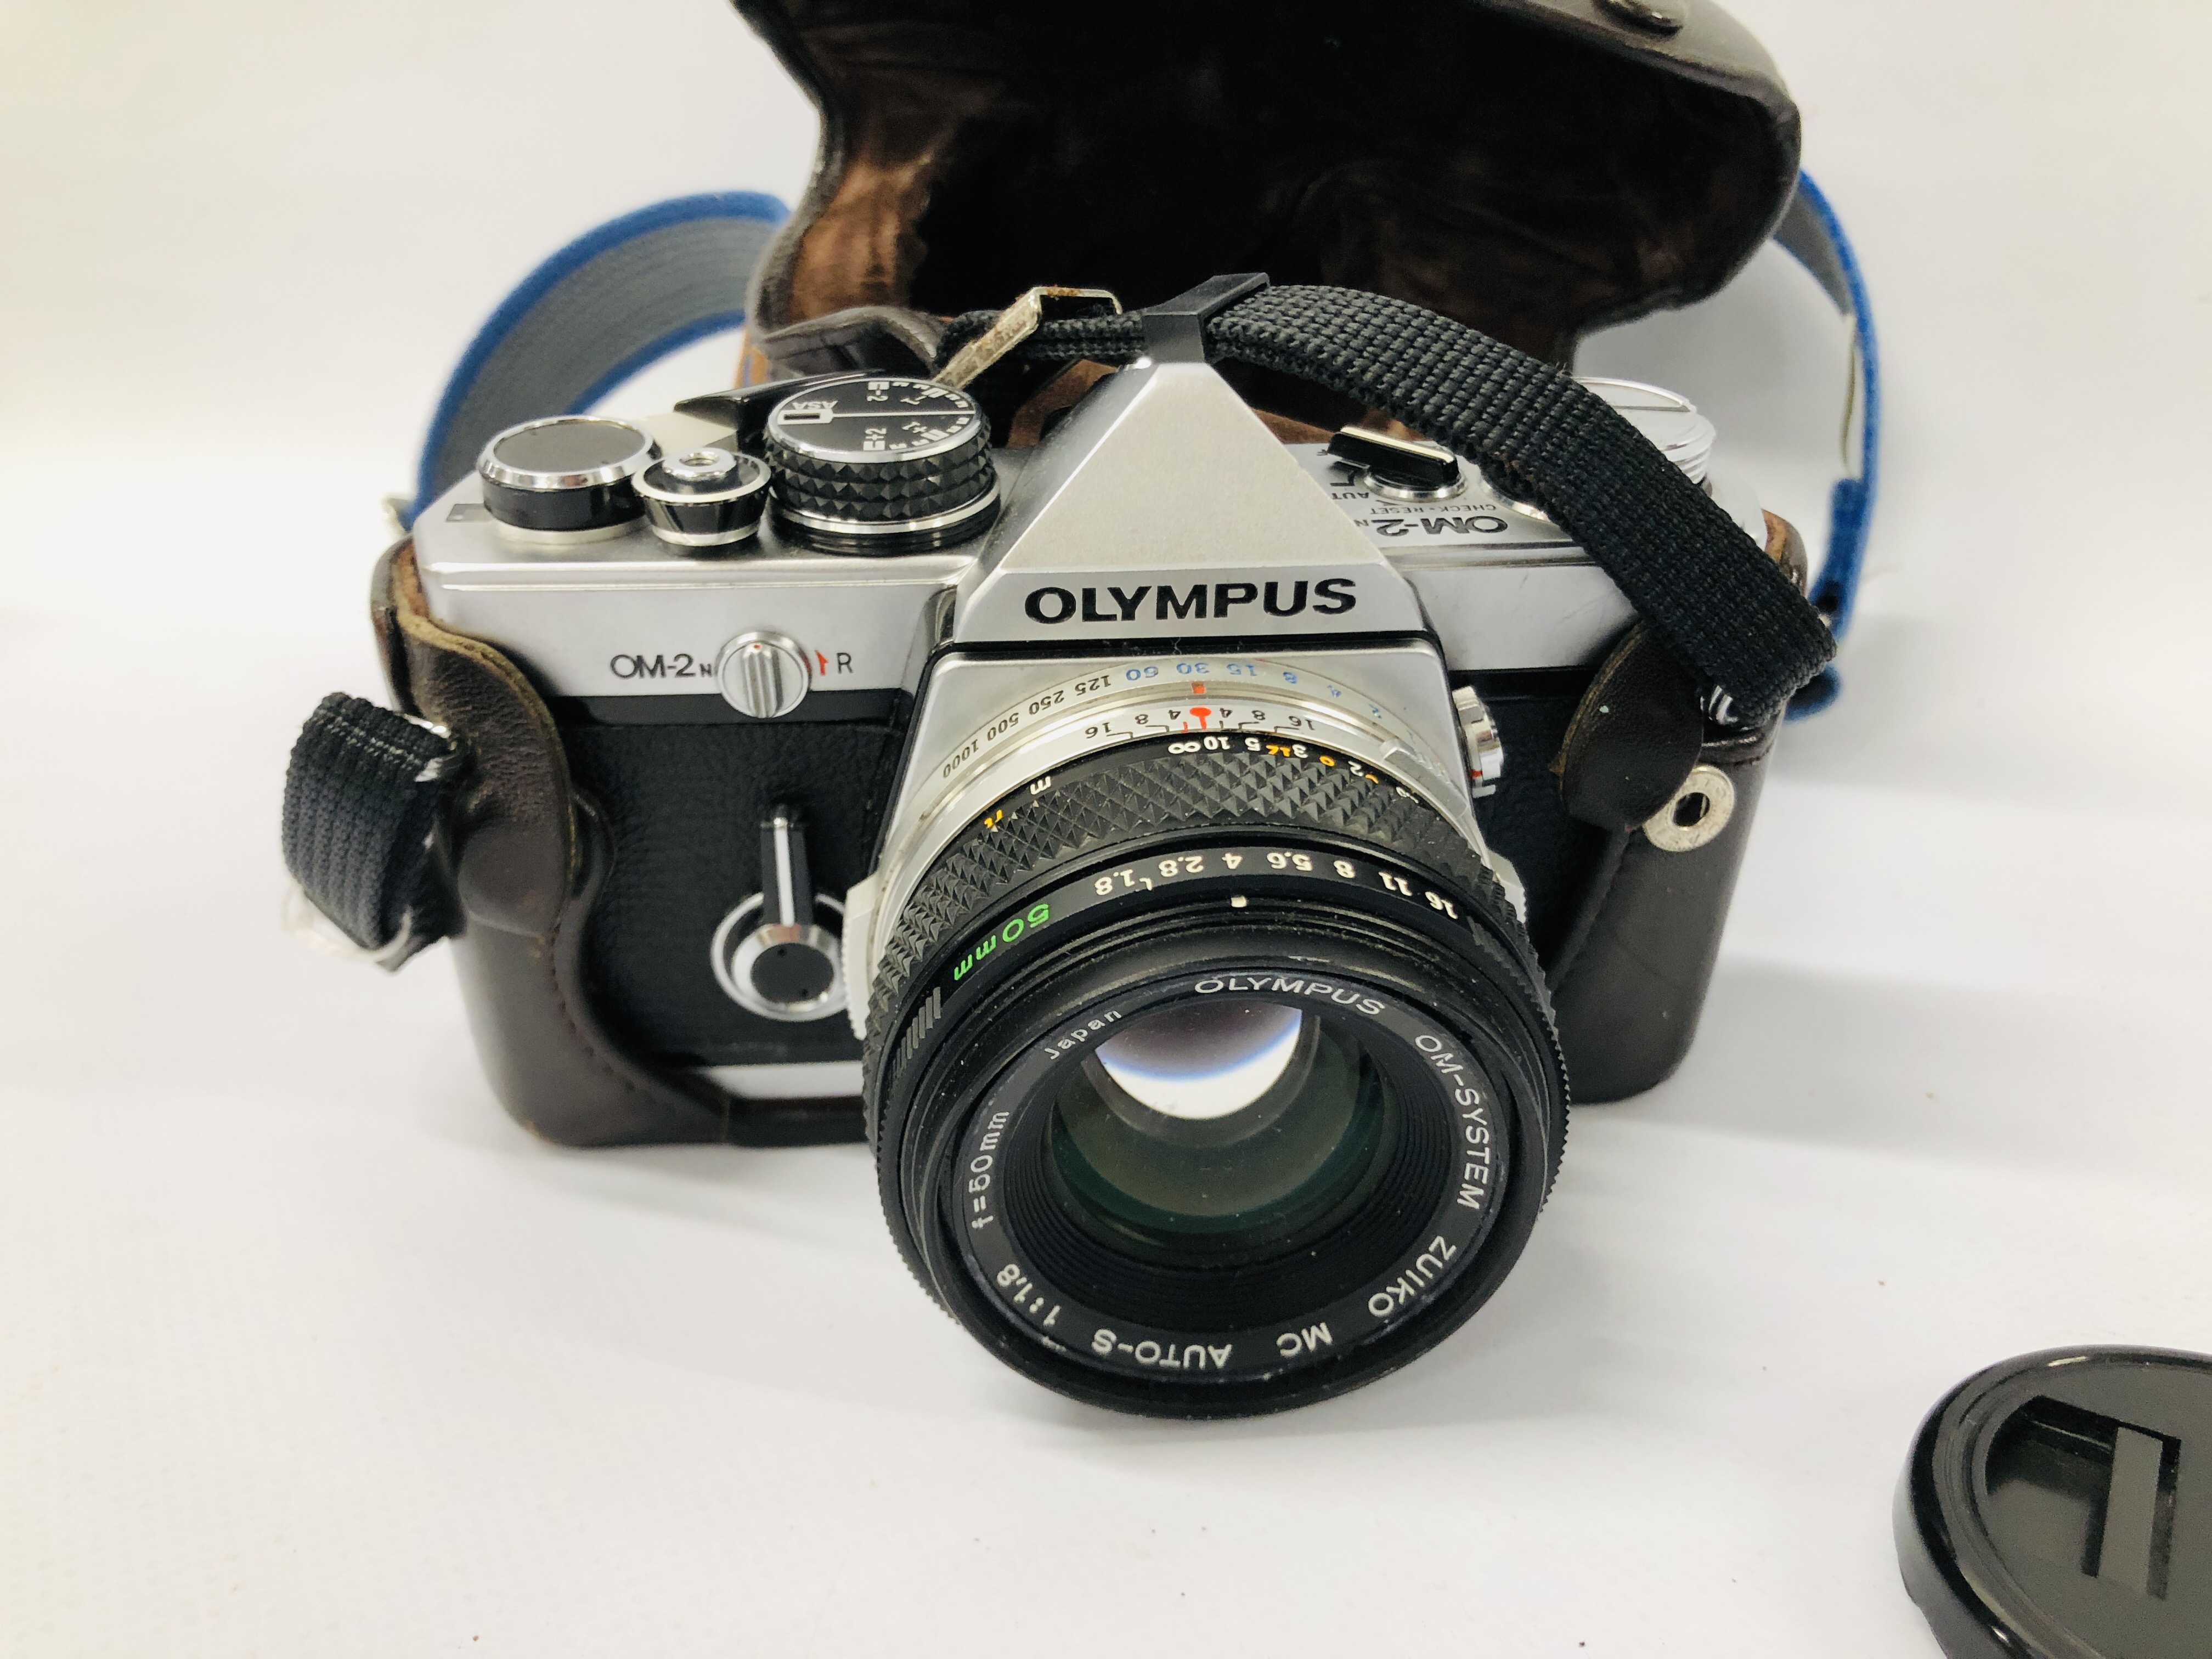 2 X DIGITAL CAMERAS - OLYMPUS OM-2N SLR 35MM CAMERA AND LEATHER CASE, - Image 6 of 8